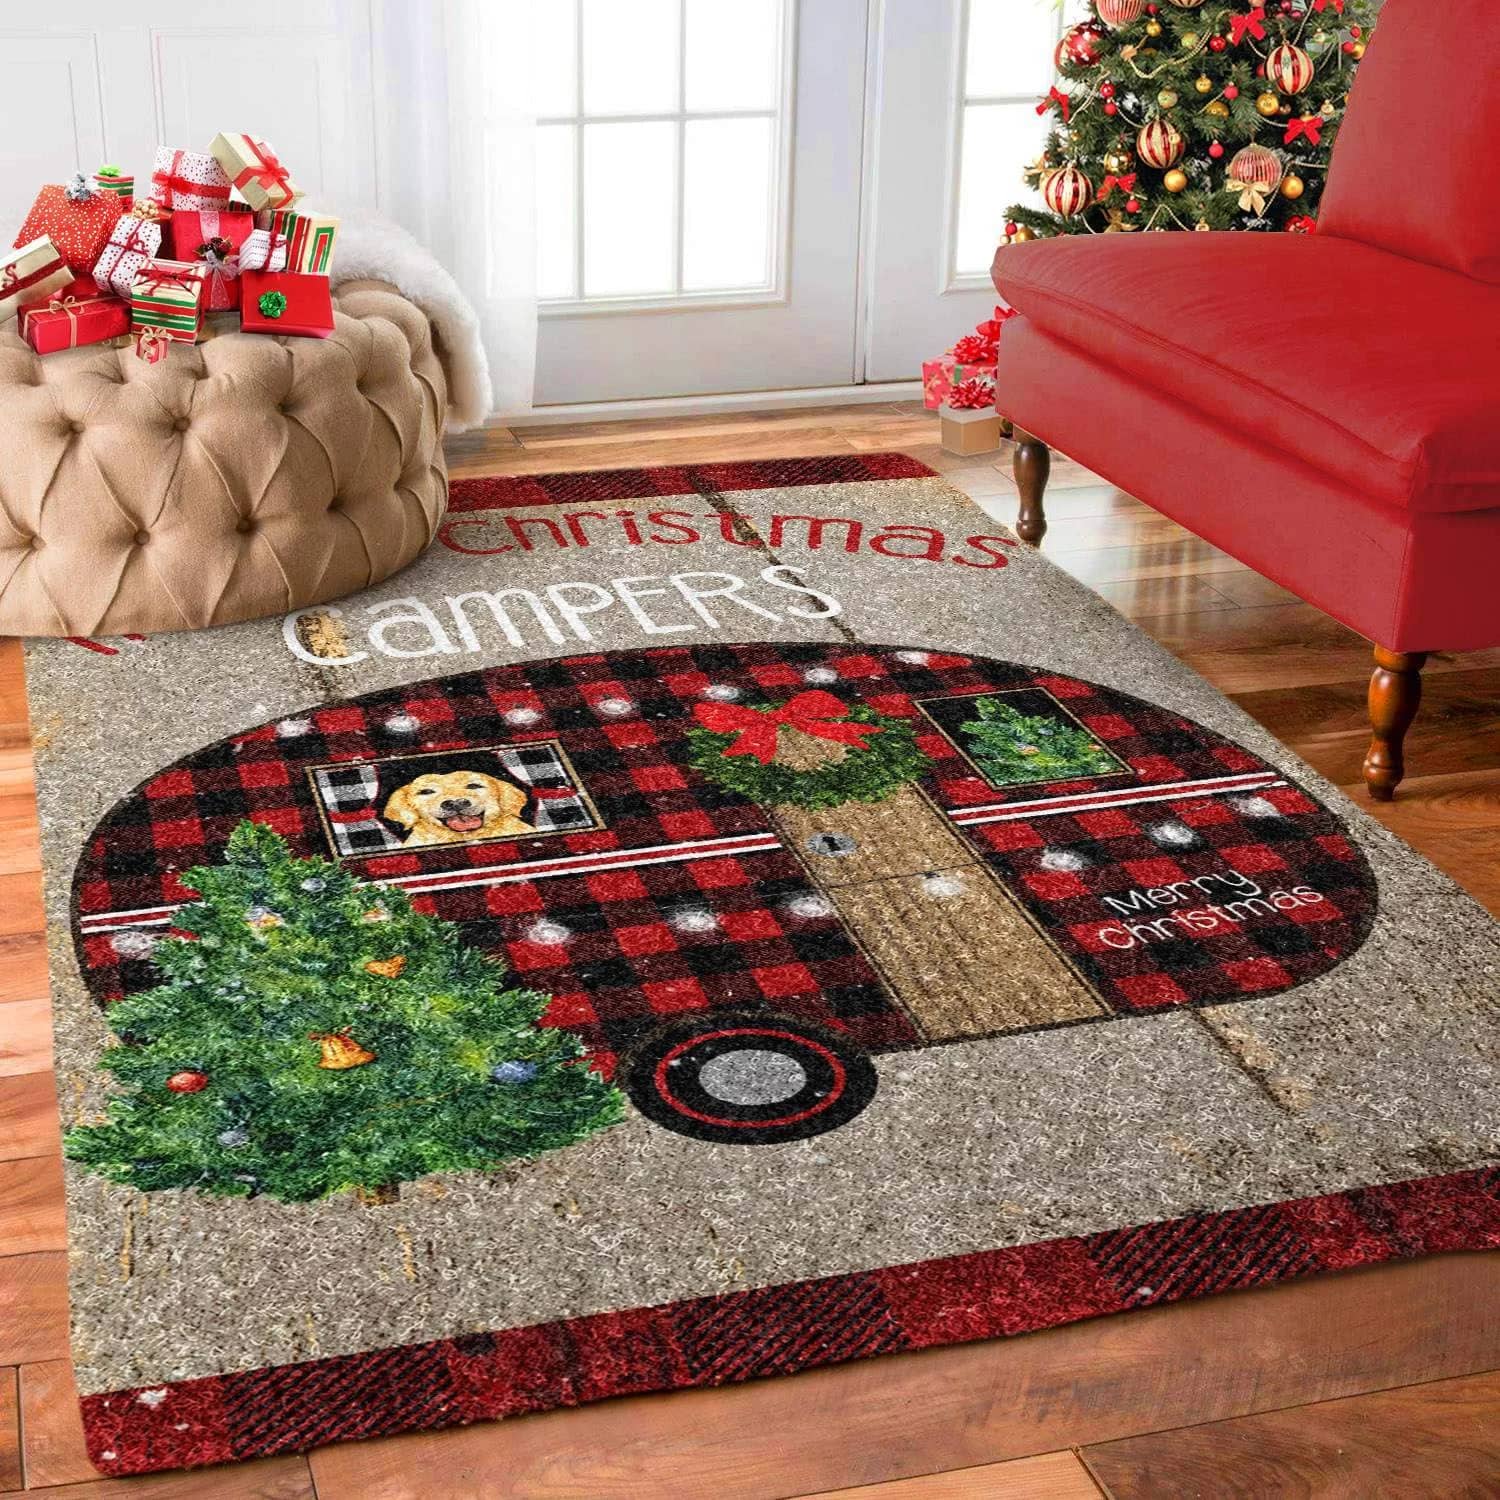 Christmas Campers Limited Edition Amazon Best Seller Sku 262132 Rug